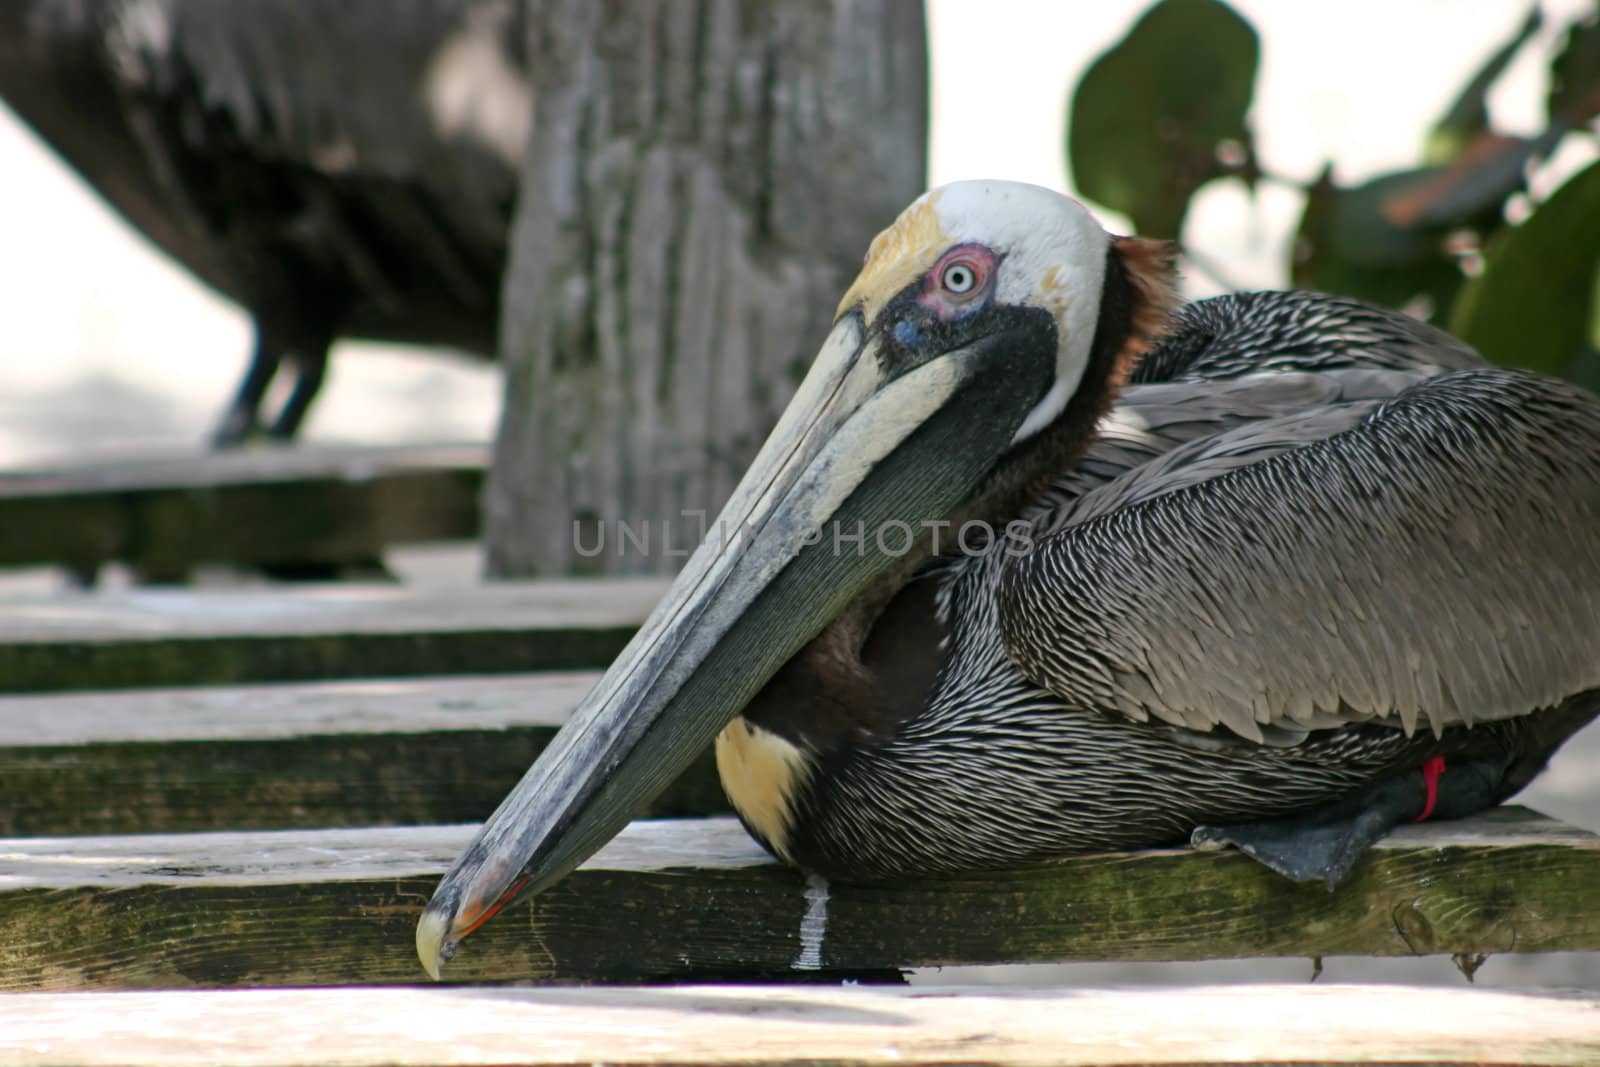 A Pelican resting, perching on some wood.